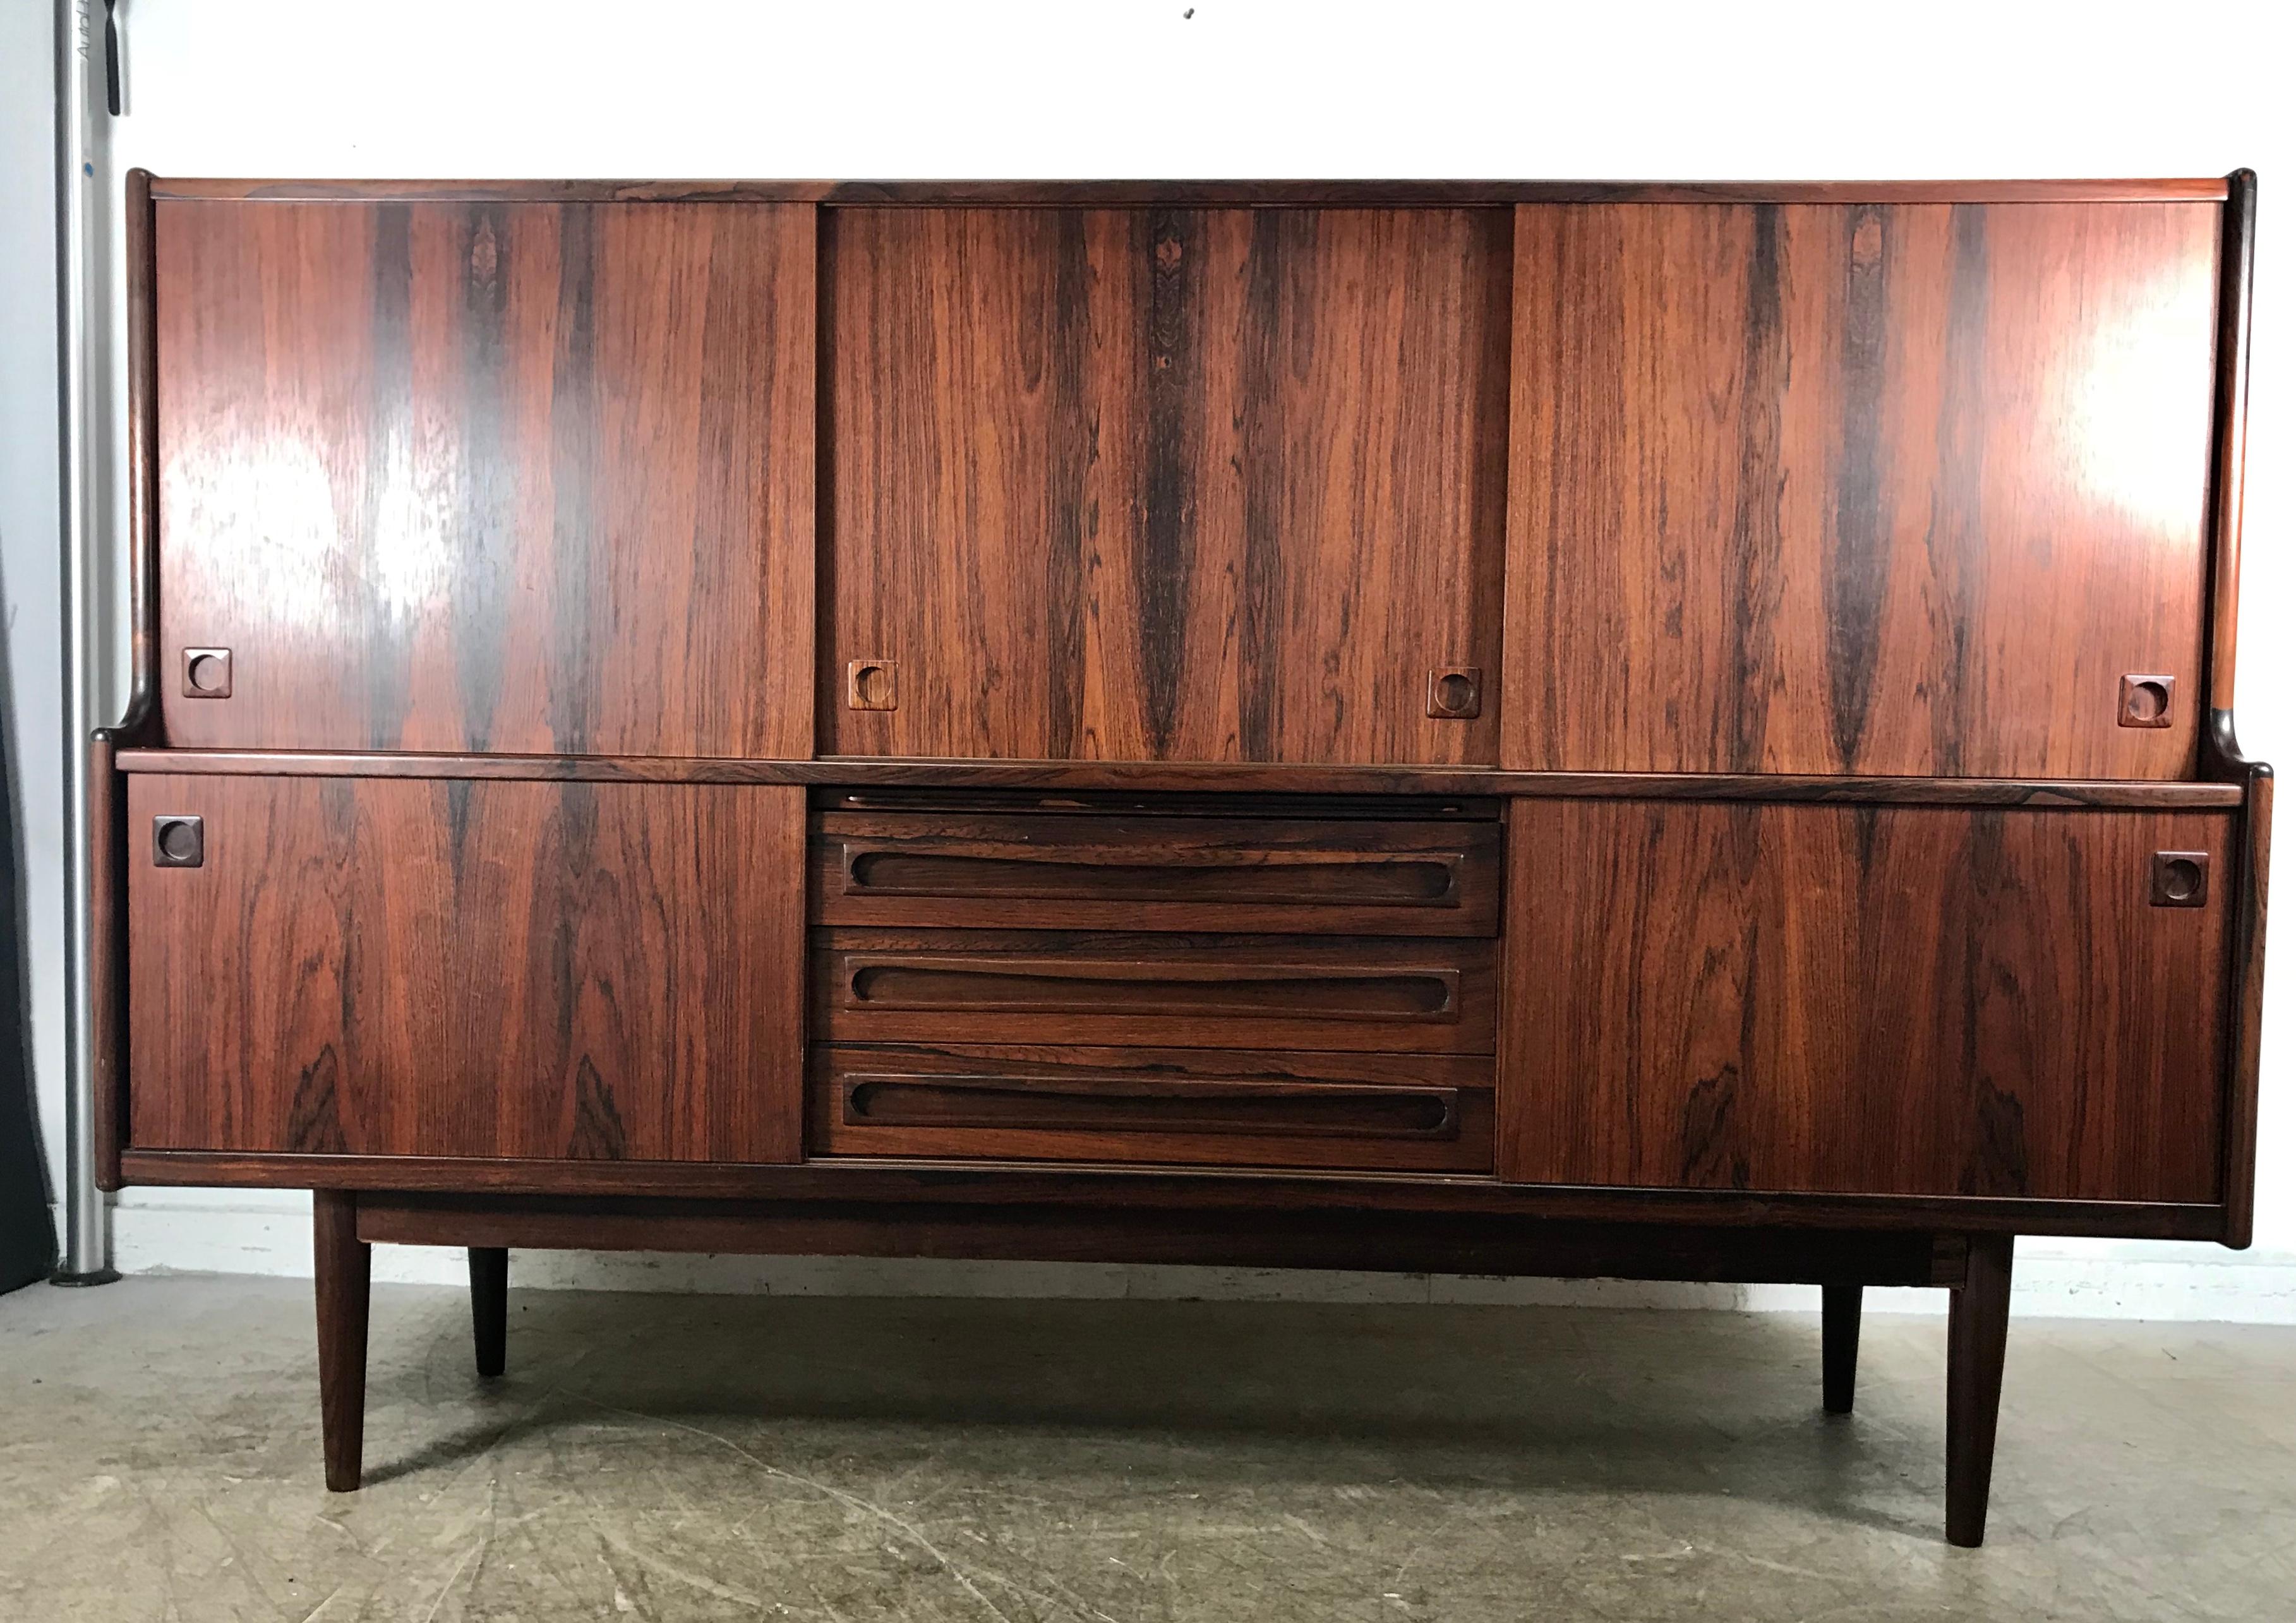 Iconic solid rosewood credenza manufactured by Omann Jun of Denmark in the late 1950s. This particular piece in amazing original condition with almost no issues to speak of. It features five sliding doors and four smooth dovetail drawers. (Bottom)